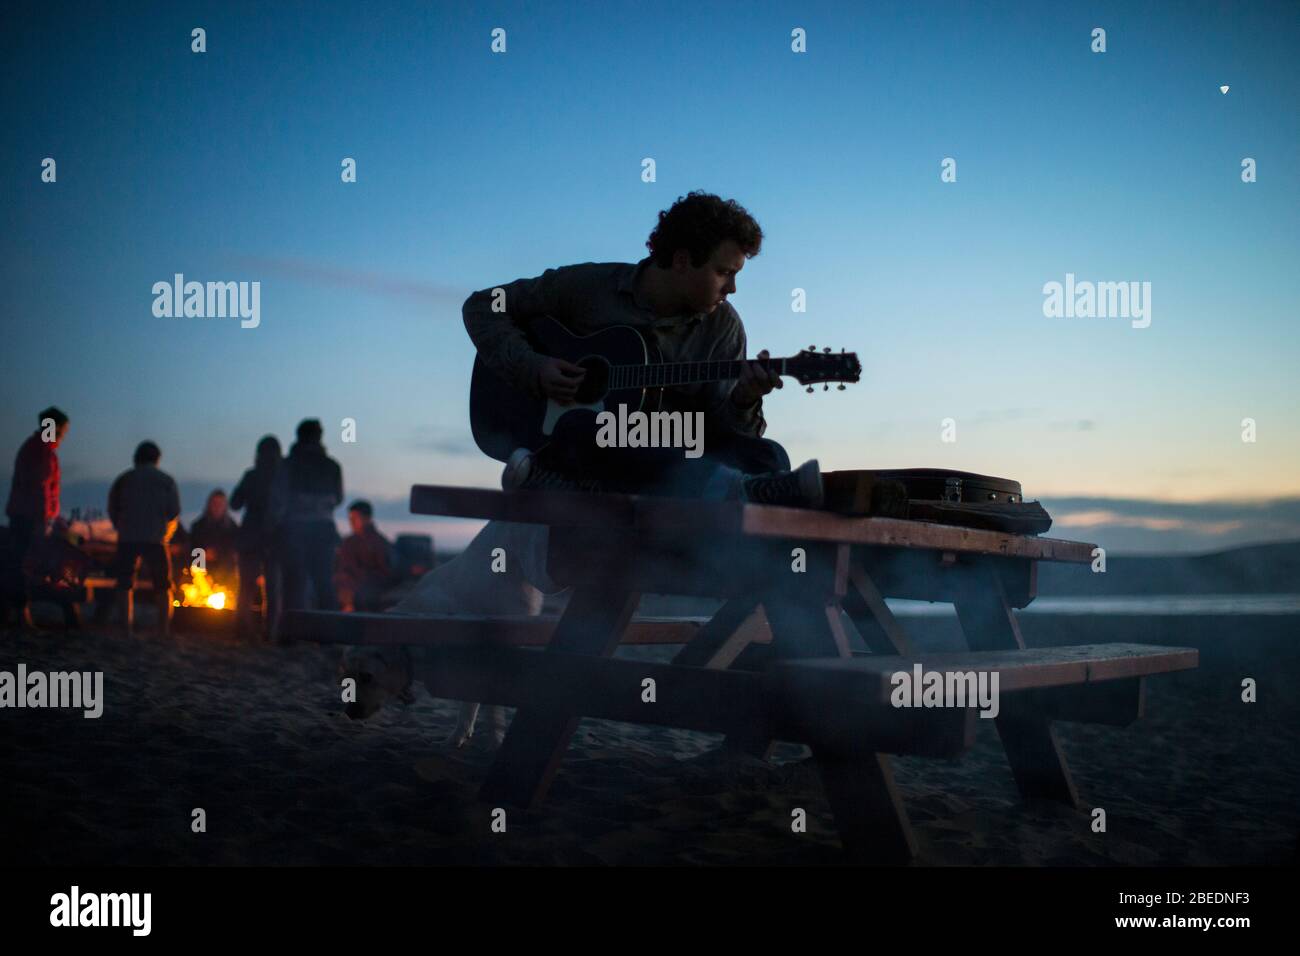 Teenage boy playing guitar on a picnic table at the beach at sunset Stock Photo